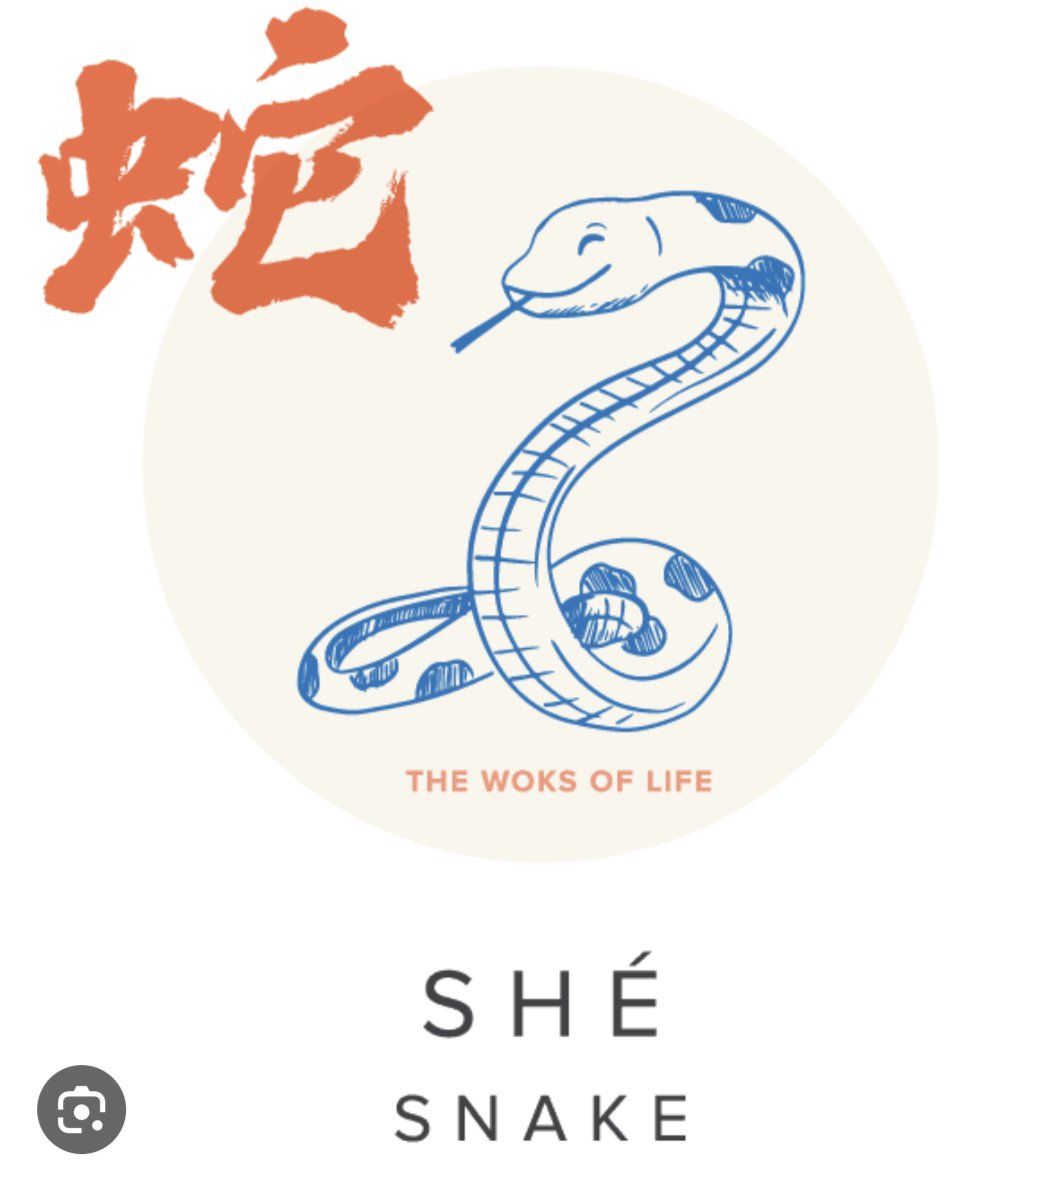 🐍💧 Just discovered our students are Water Snakes in the Chinese Zodiac! Creative and intuitive, they'll slither through challenges with fluidity and grace. Let's embrace their unique strengths this year! #ChineseZodiac #WaterSnake @Bfarrugia_